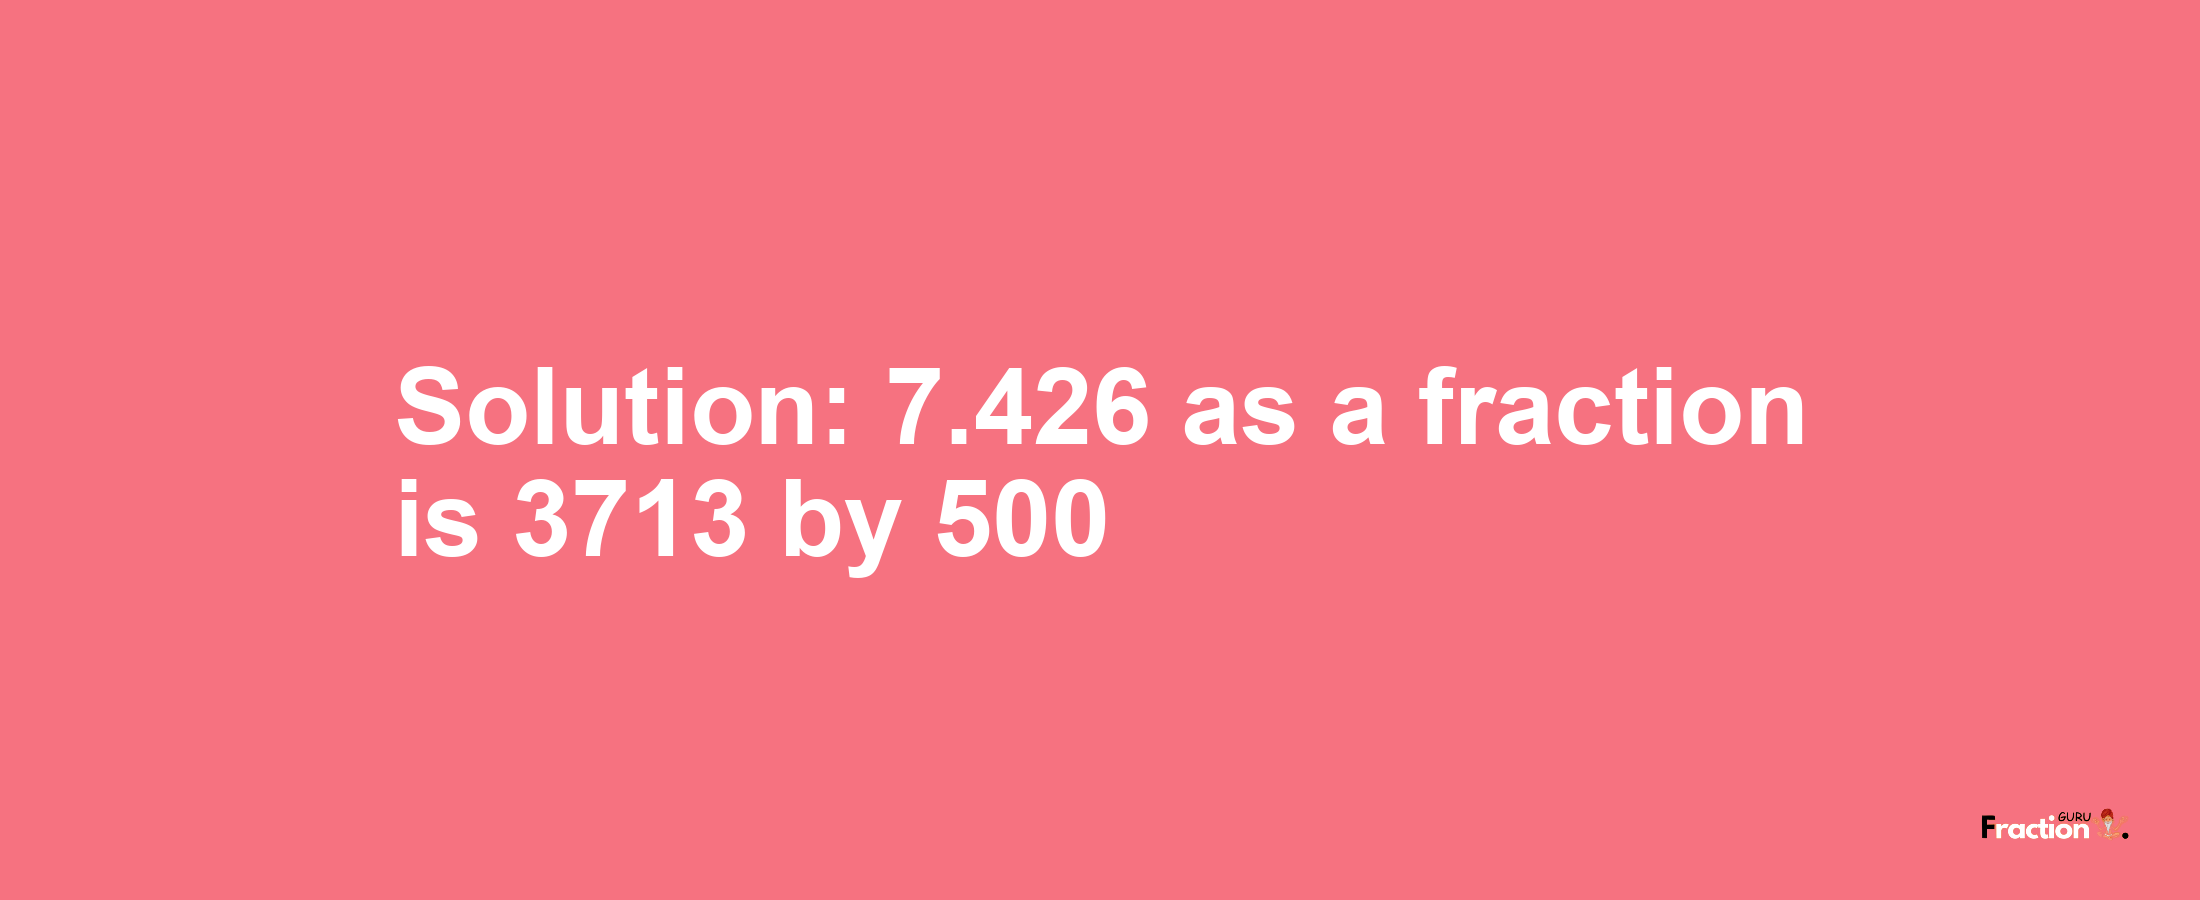 Solution:7.426 as a fraction is 3713/500